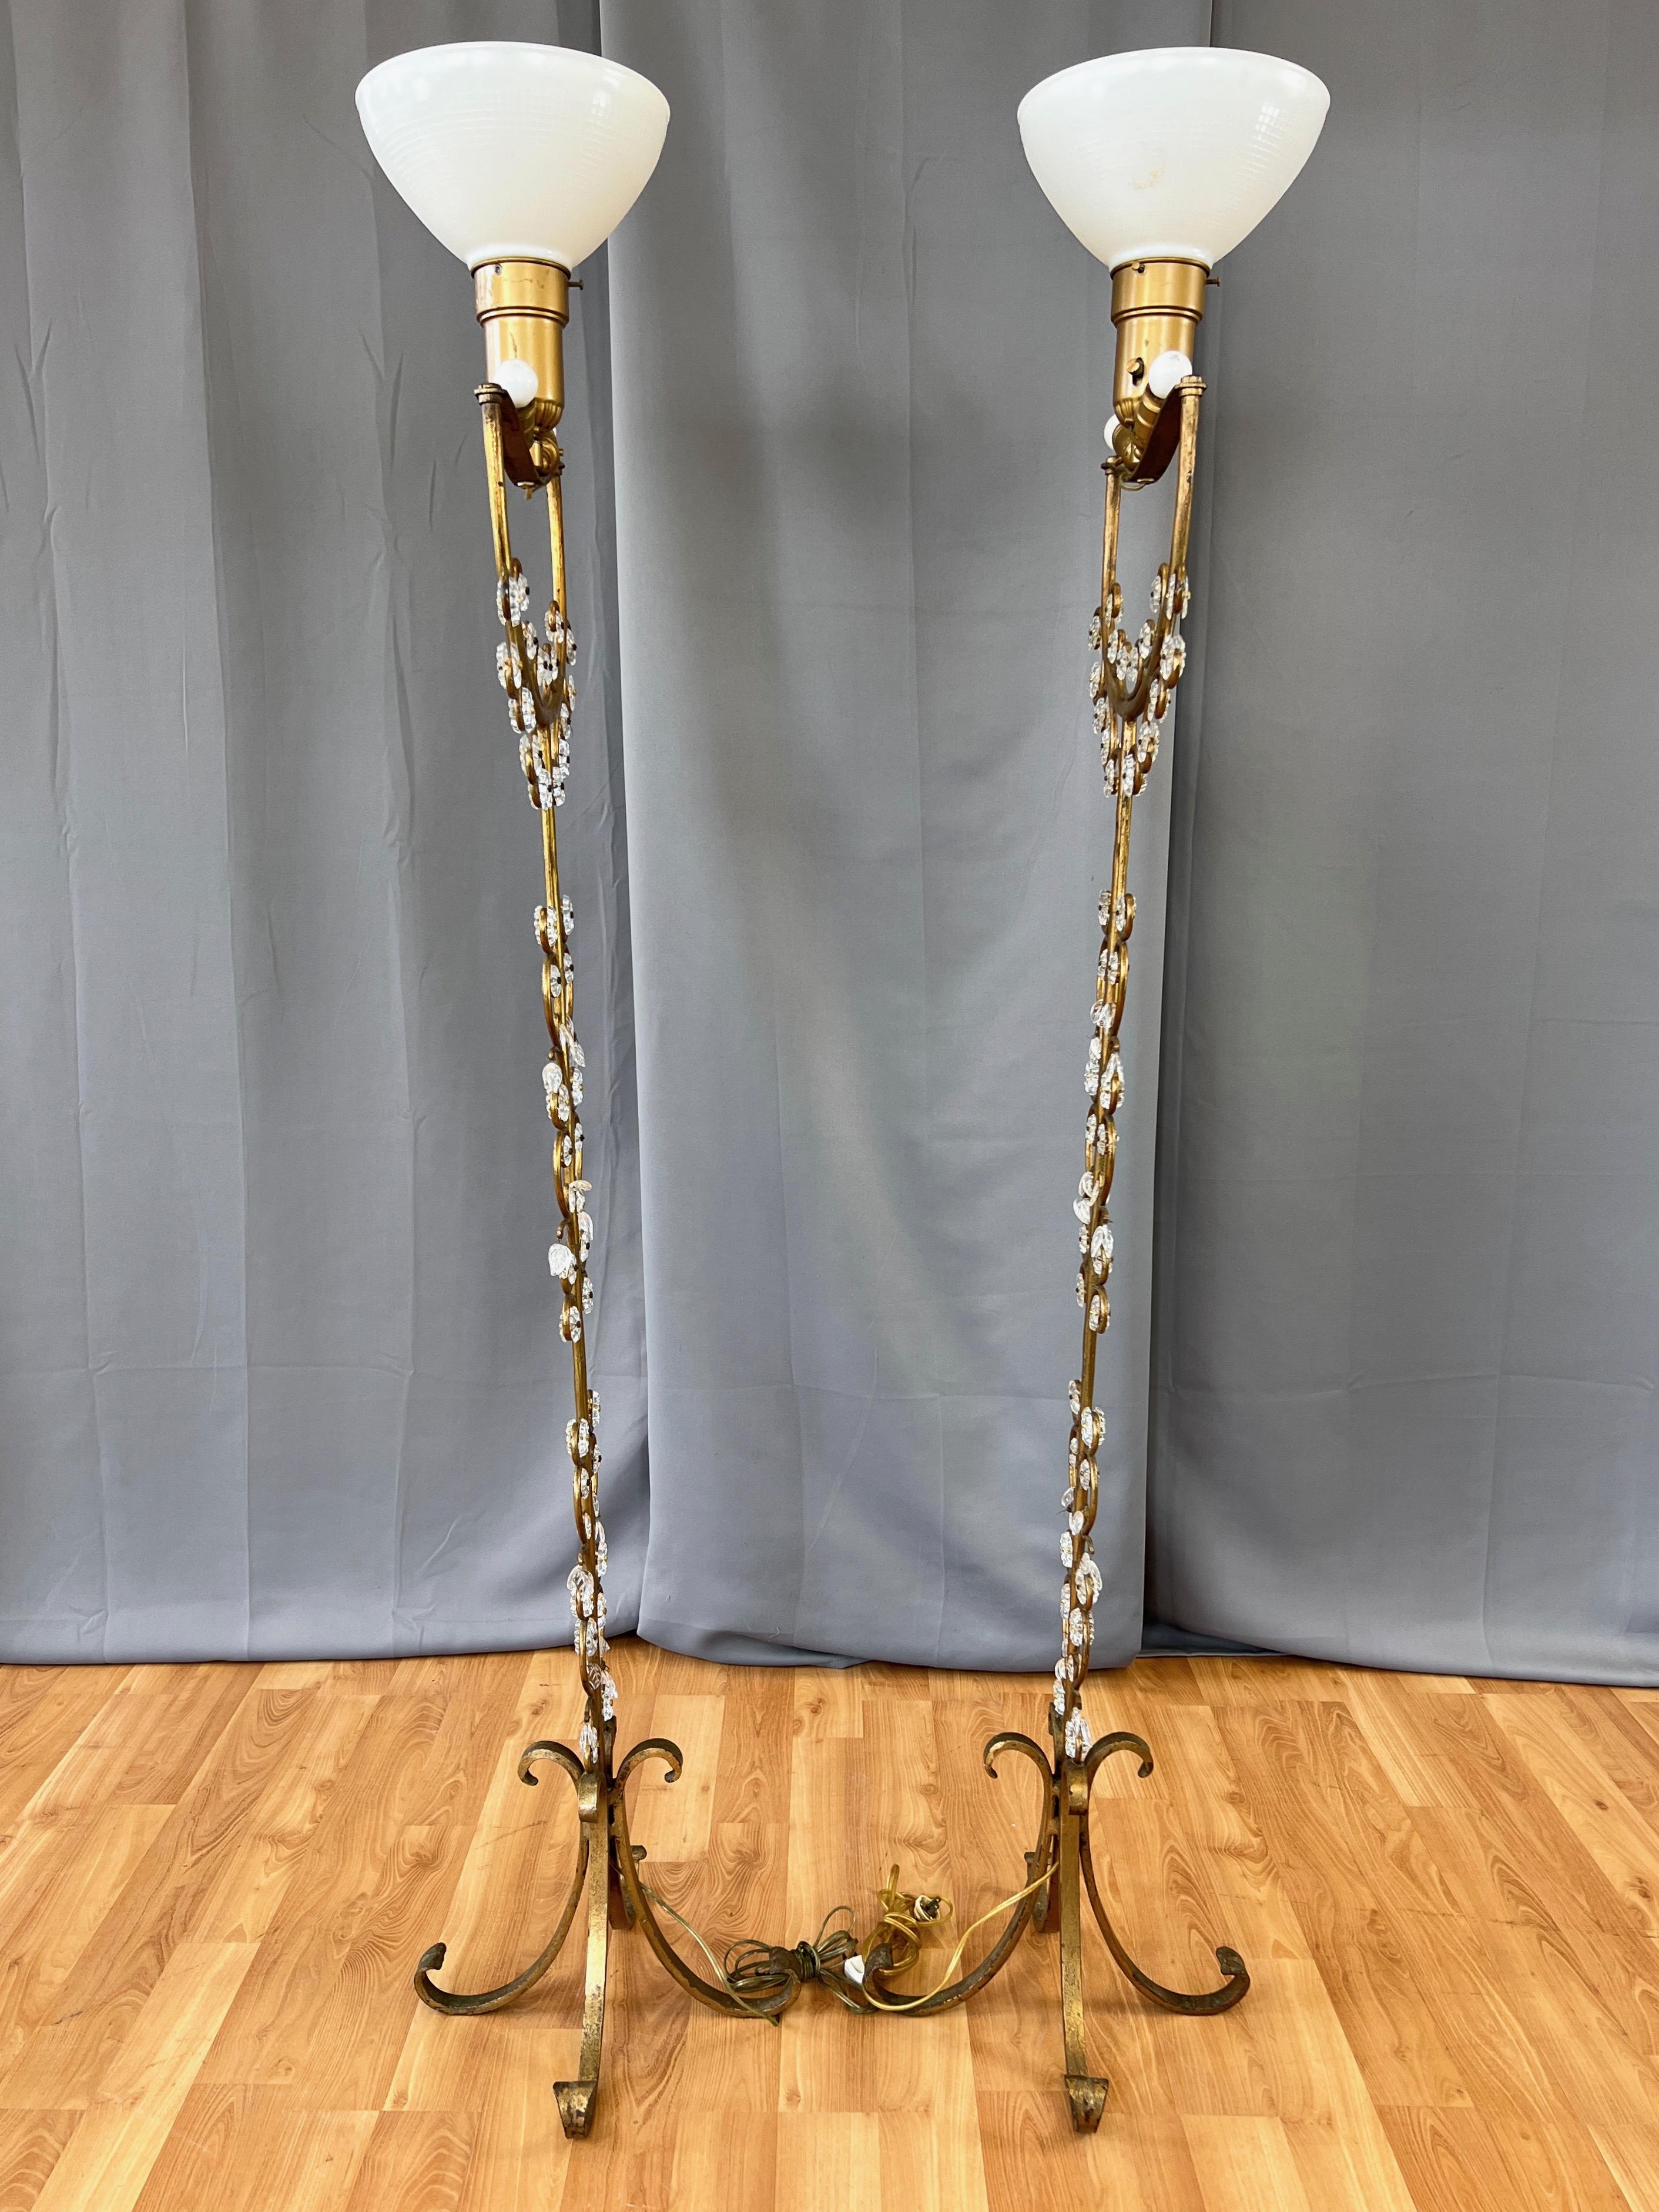 Pair of Italian Gilt Wrought Iron Floor Lamps with Glass Florets & Leaves, 1950s For Sale 9